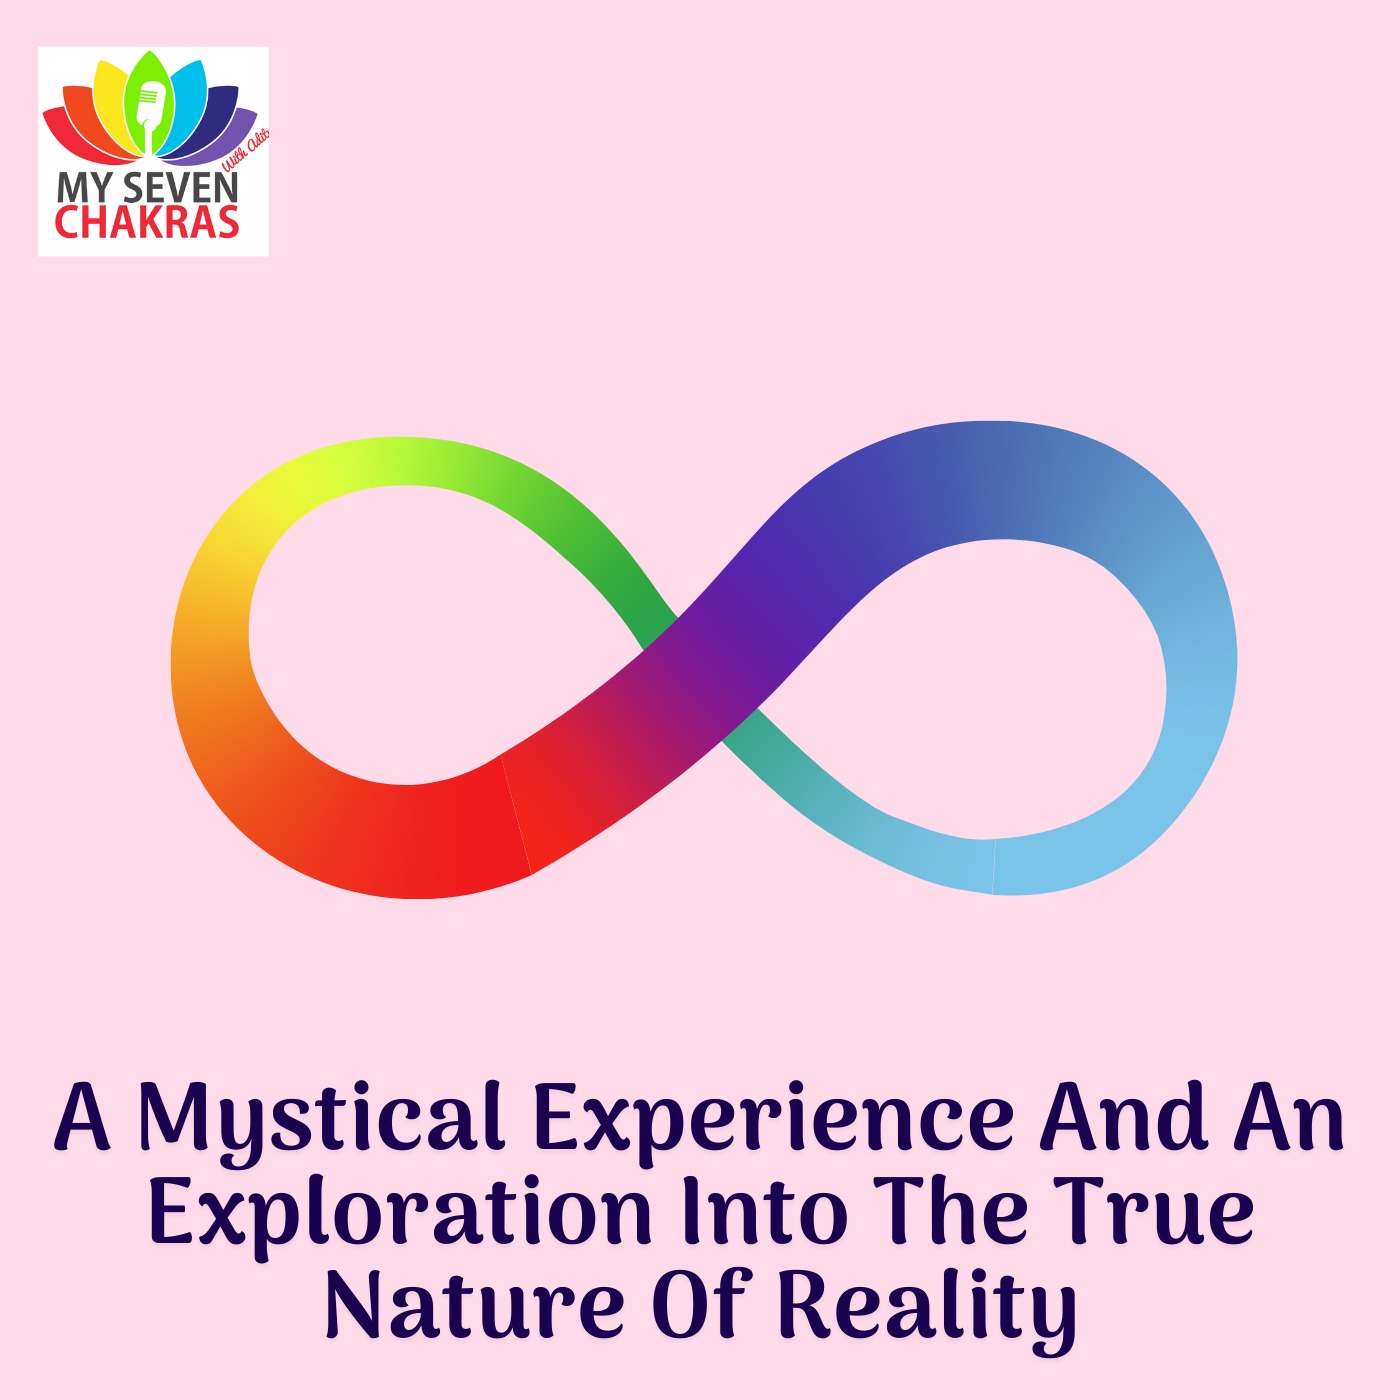 A Mystical Experience And An Exploration Into The True Nature Of Reality